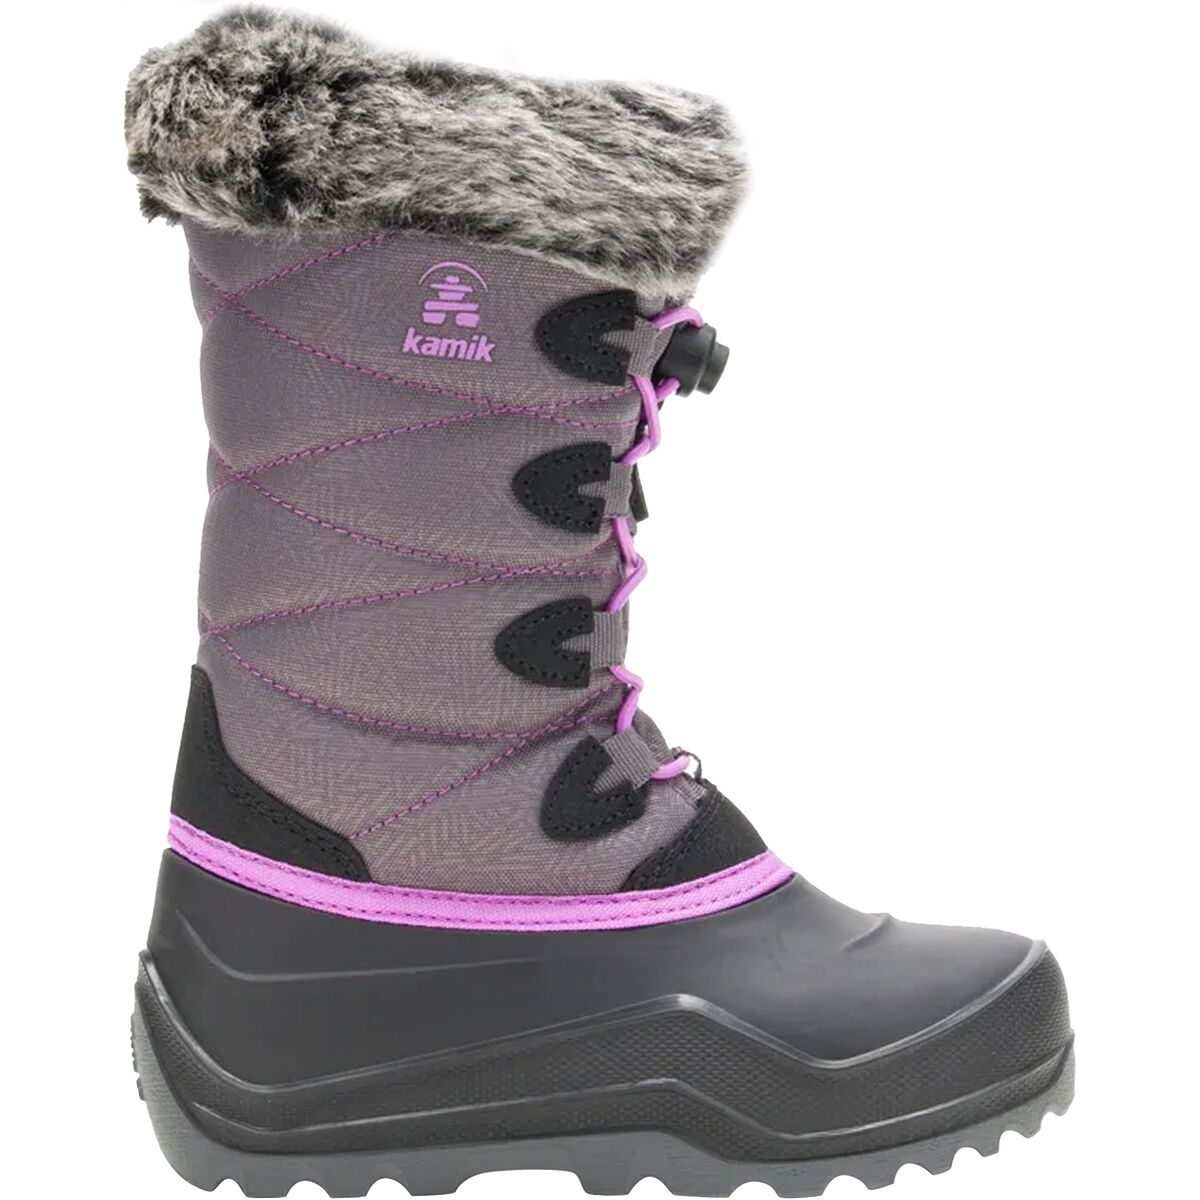 Snowgypsy 4 Boot - Kids